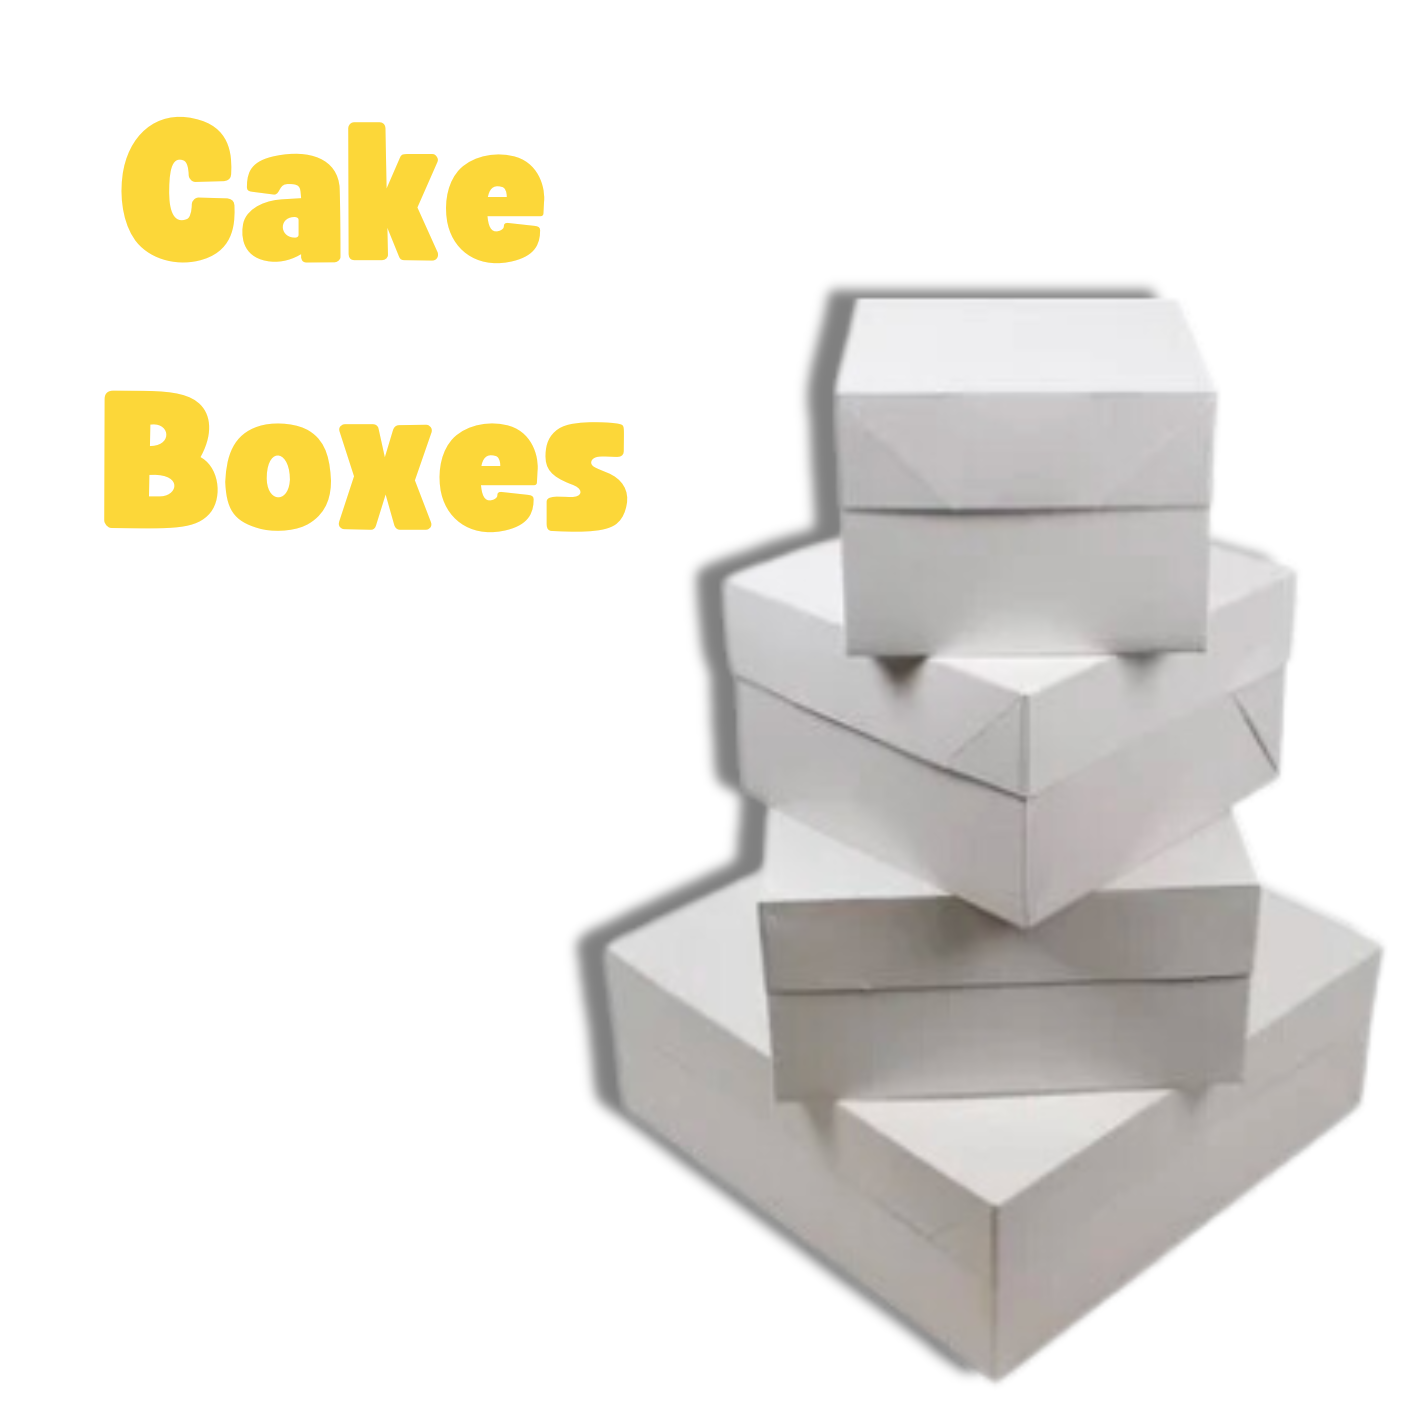 CAKE BOX 28 X 20 X 5 CM PRESTIGE - Multipack-Disposable Food Packaging  Supplier and Manufacturer in UAE